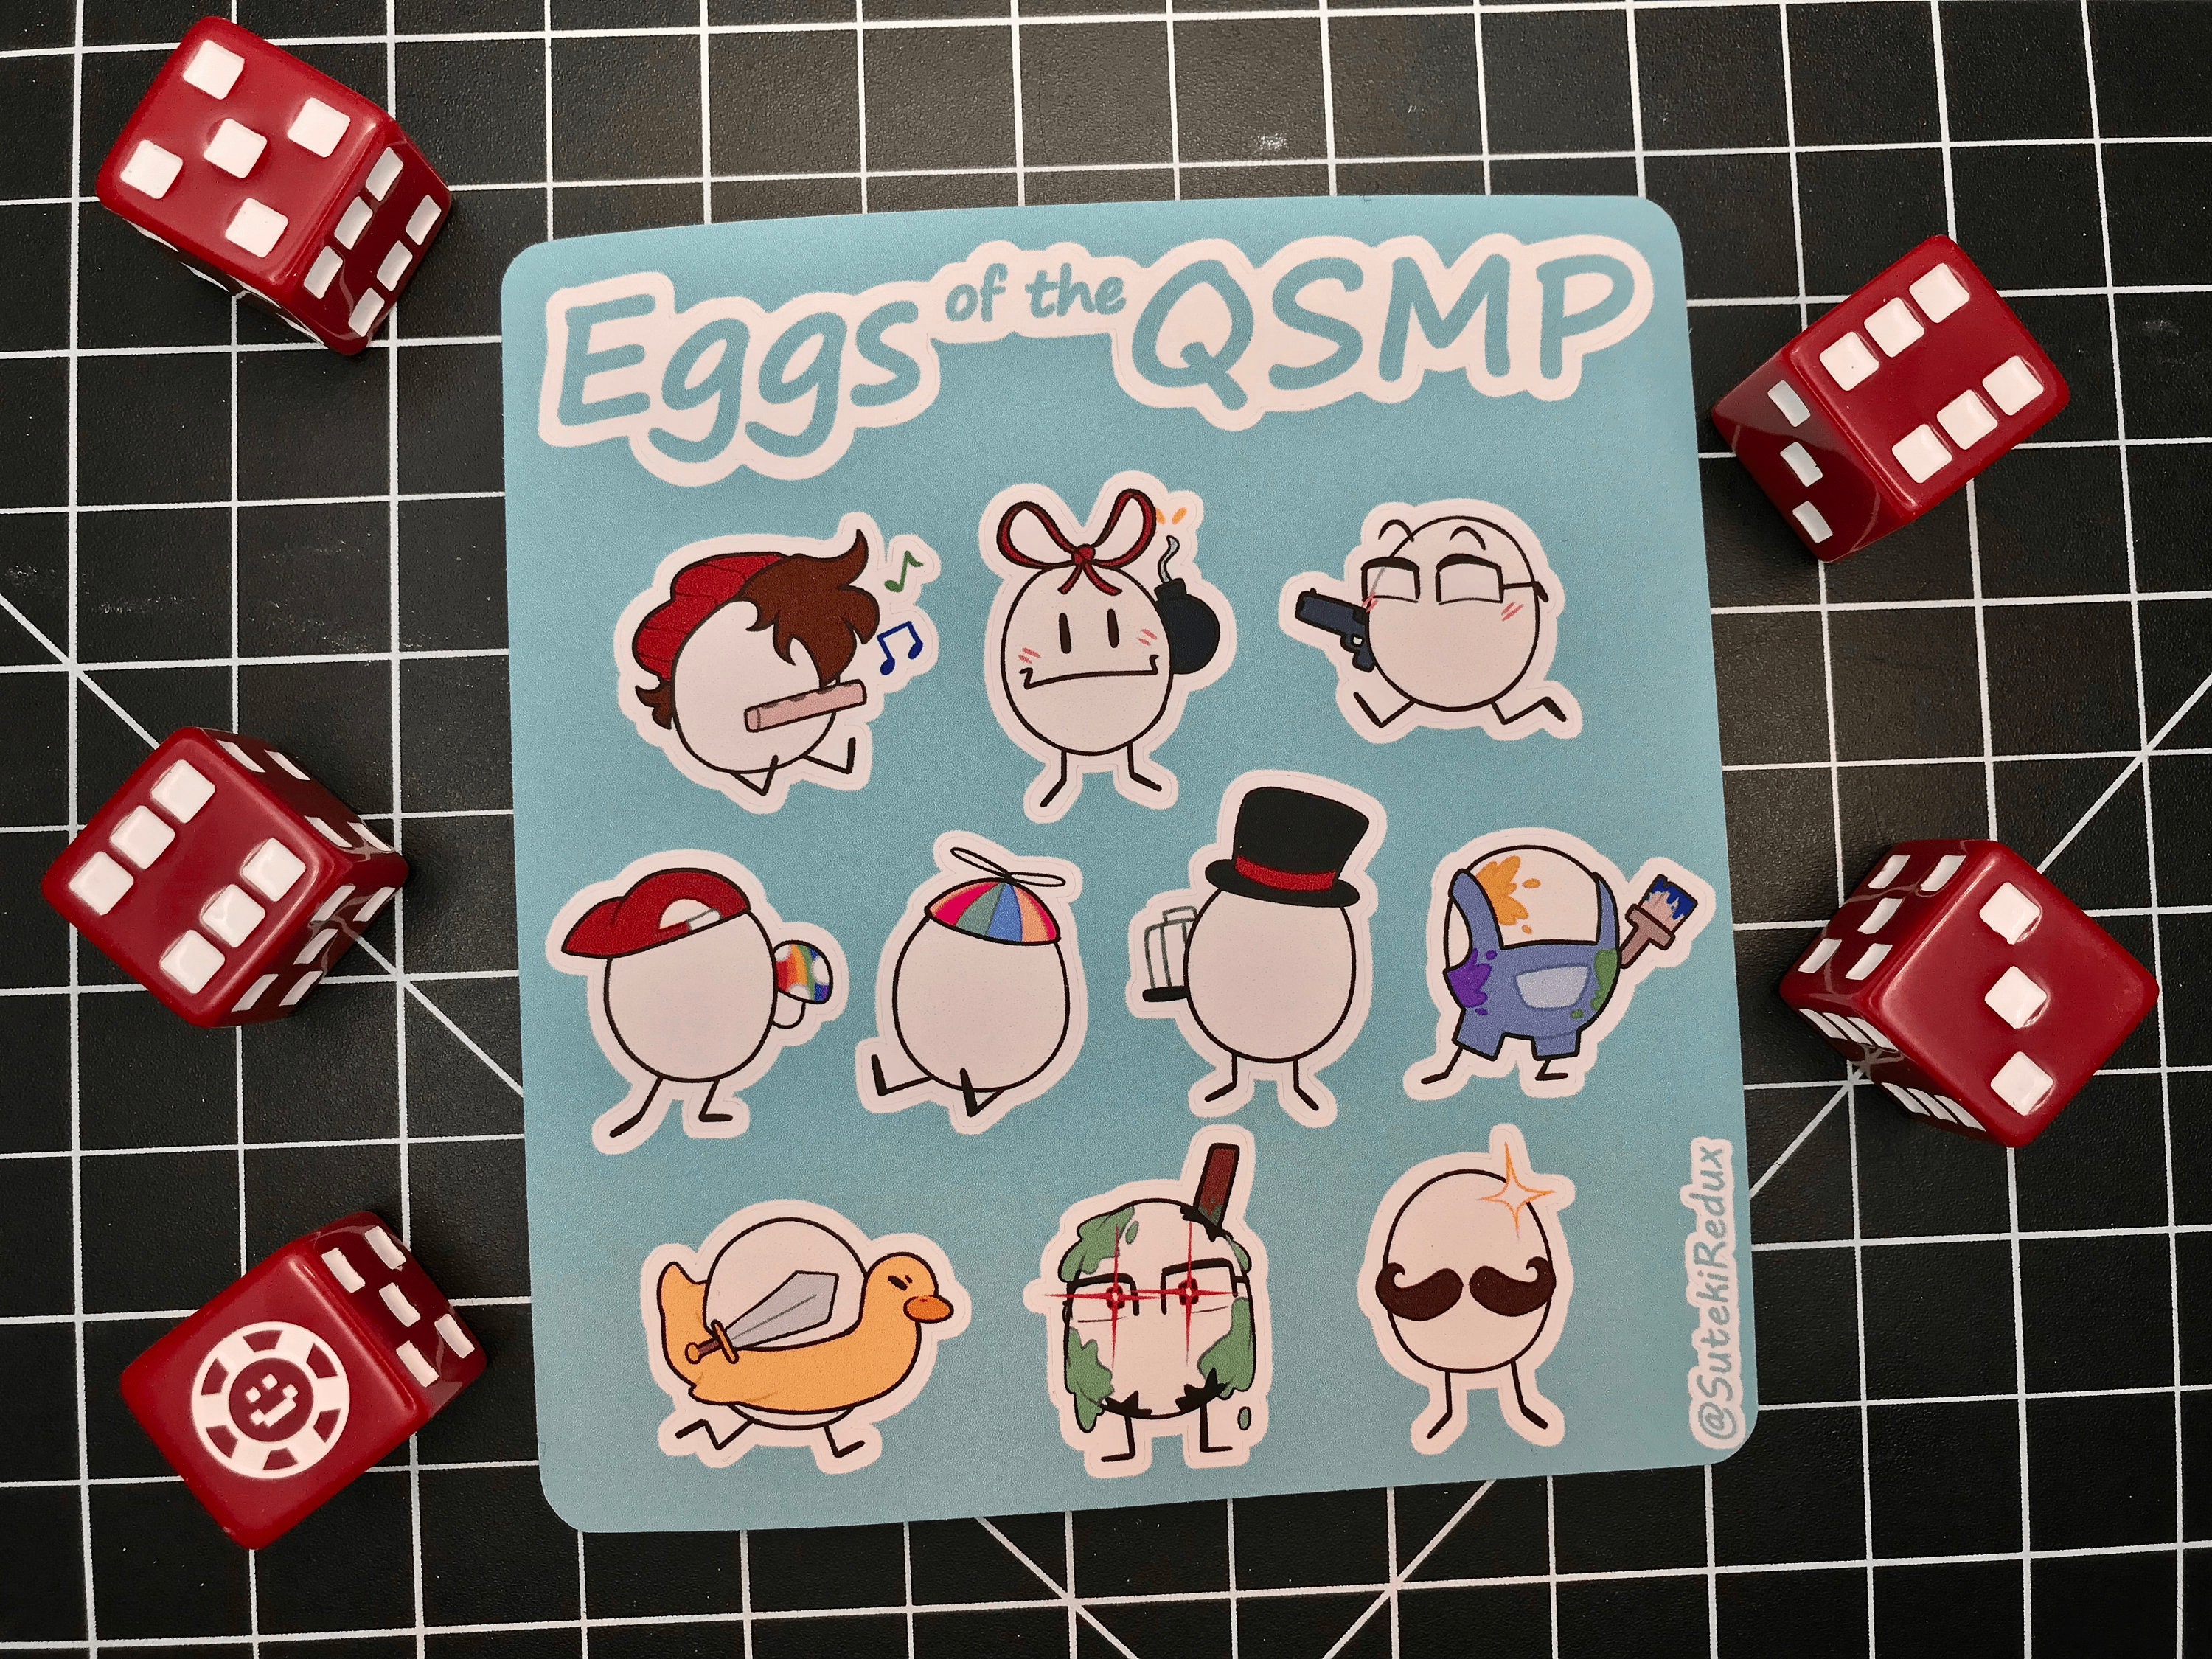 Updates on Quackity! — QSMP Updates tweeted! Here's the eggs!